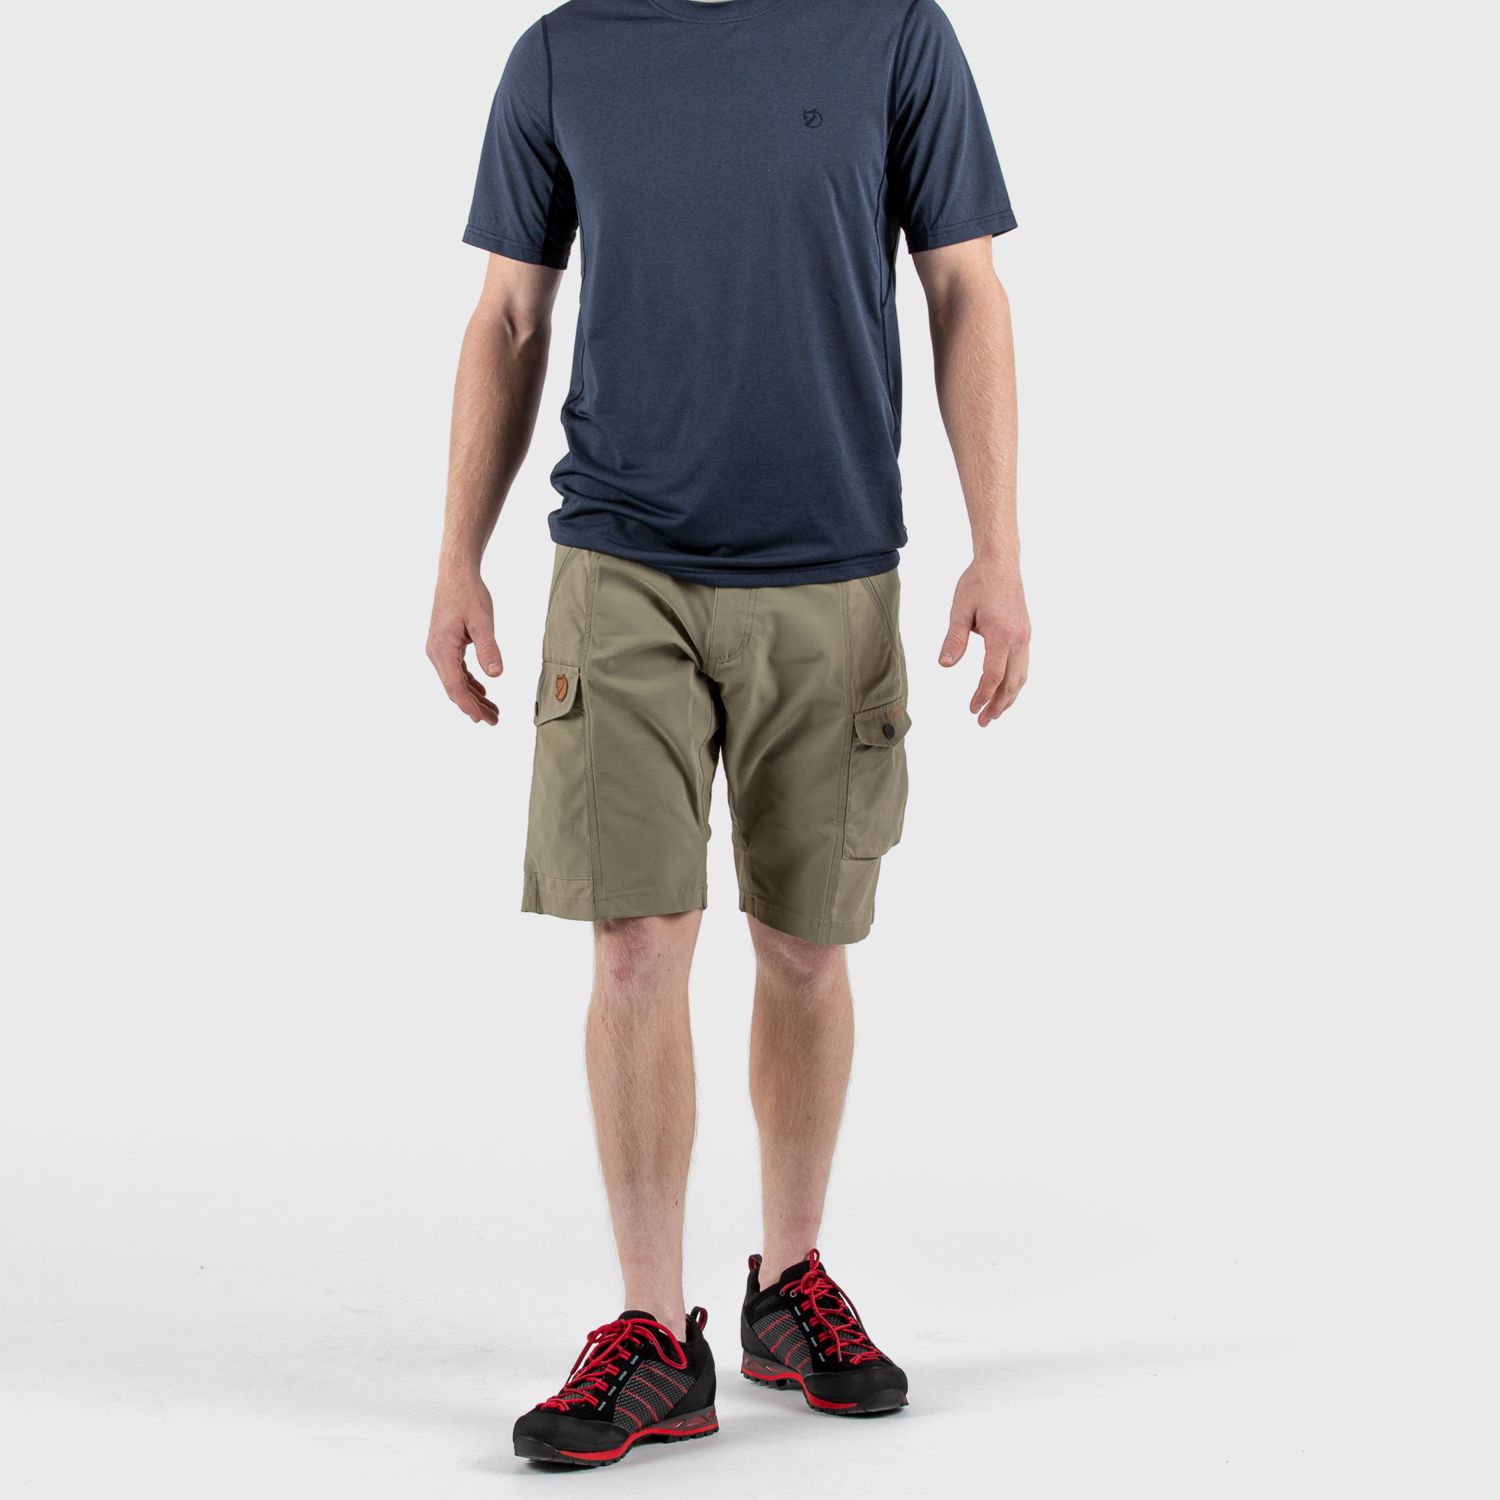 Fjallraven light olive branded premium men's shorts/trousers with leather fox logo and stylish pockets.